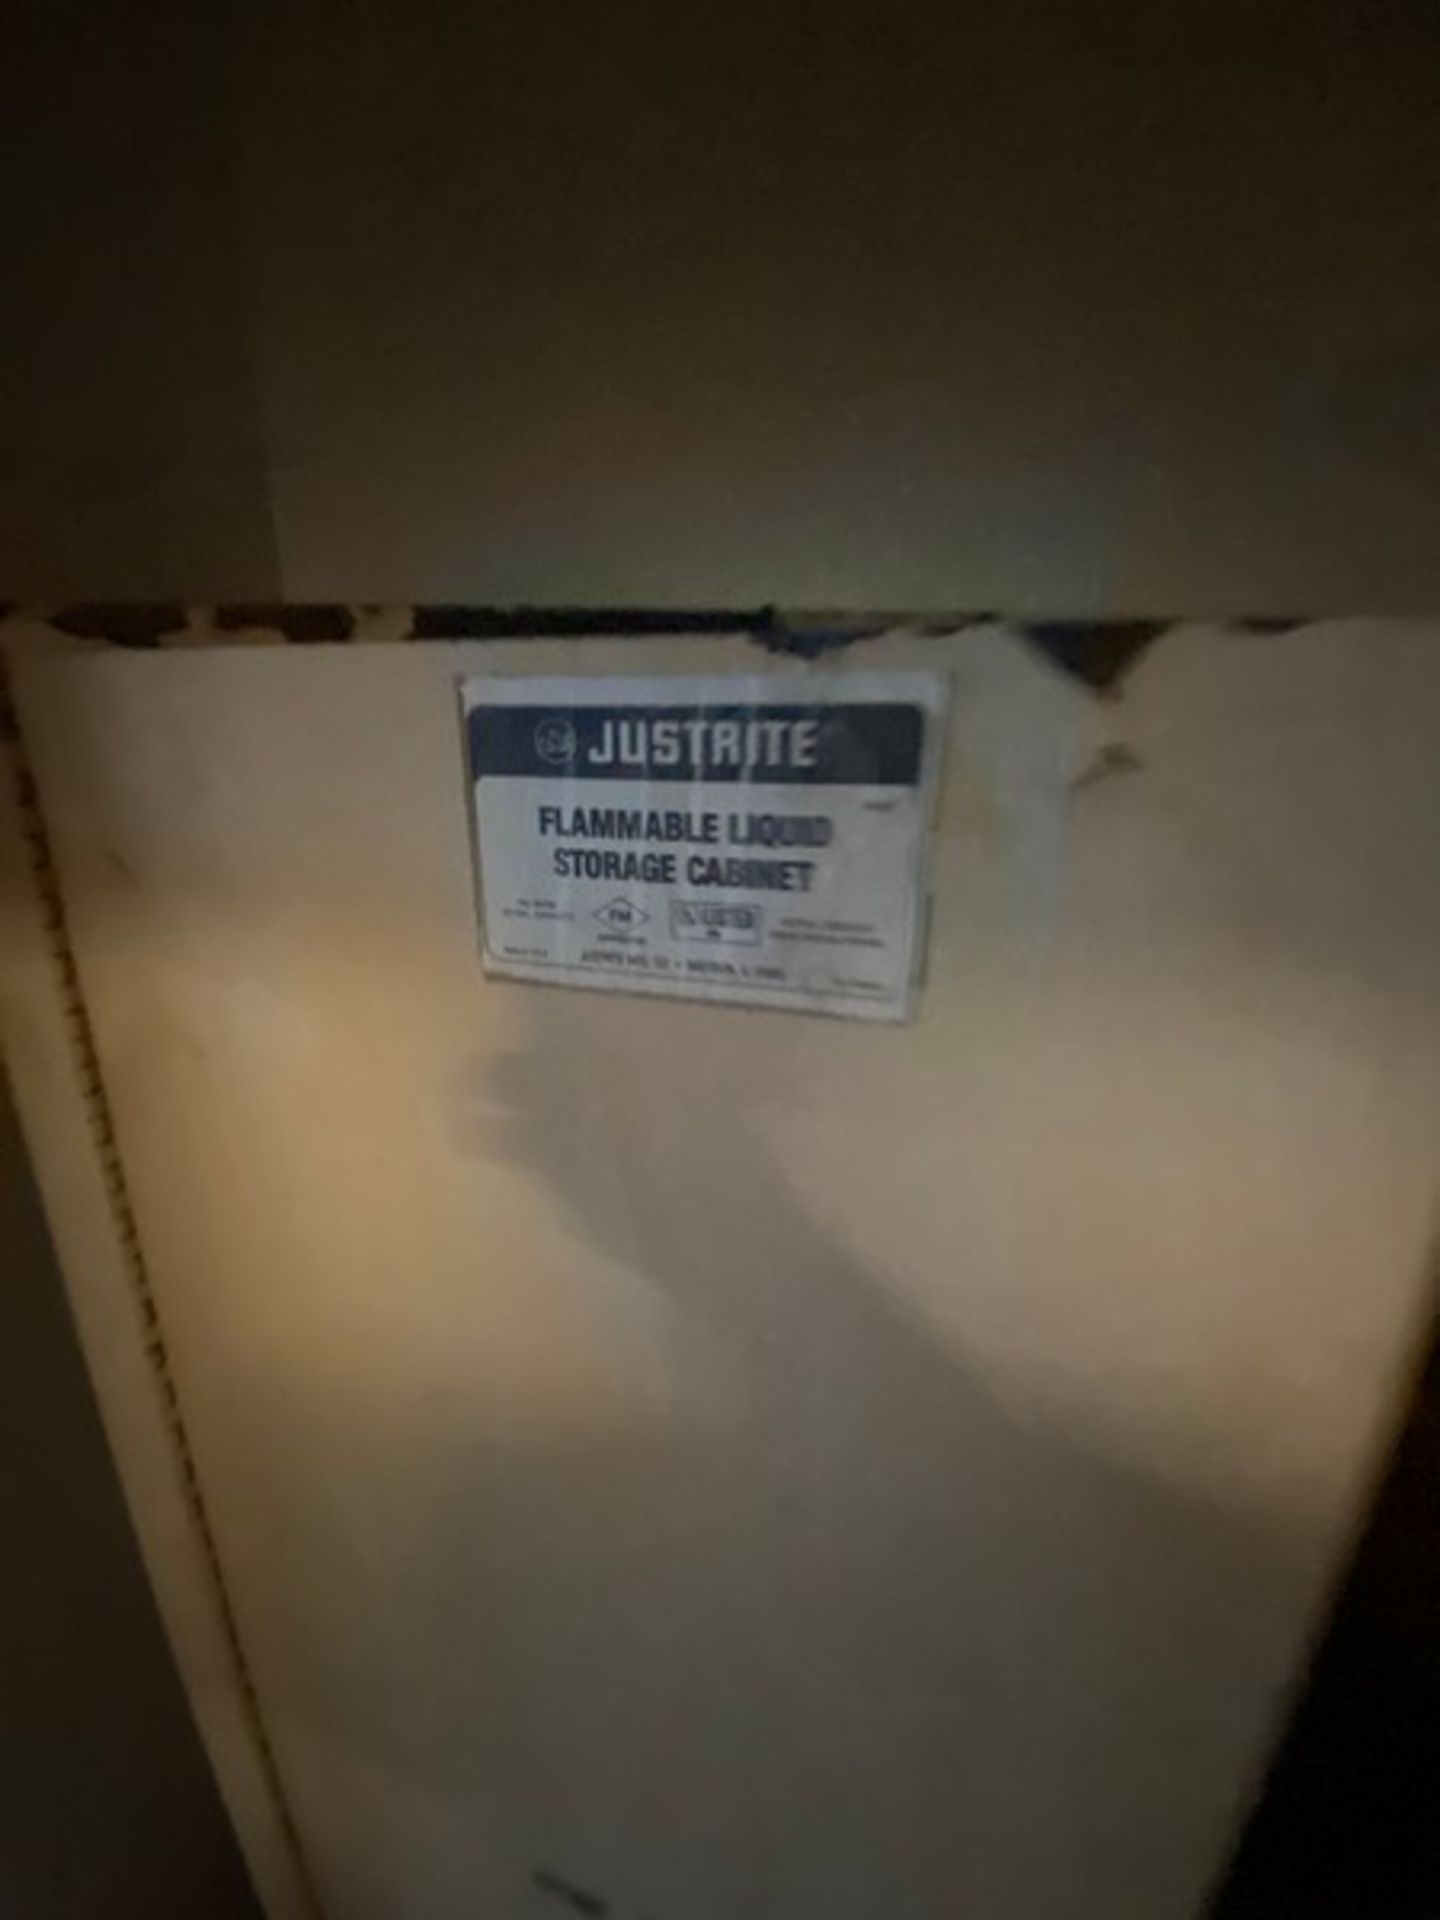 JustRite 45 Gal. Double Door FlammableCabinet(RIGGING, LOADING, SITE MANAGEMENT FEE: $50.00 USD) - Image 4 of 5